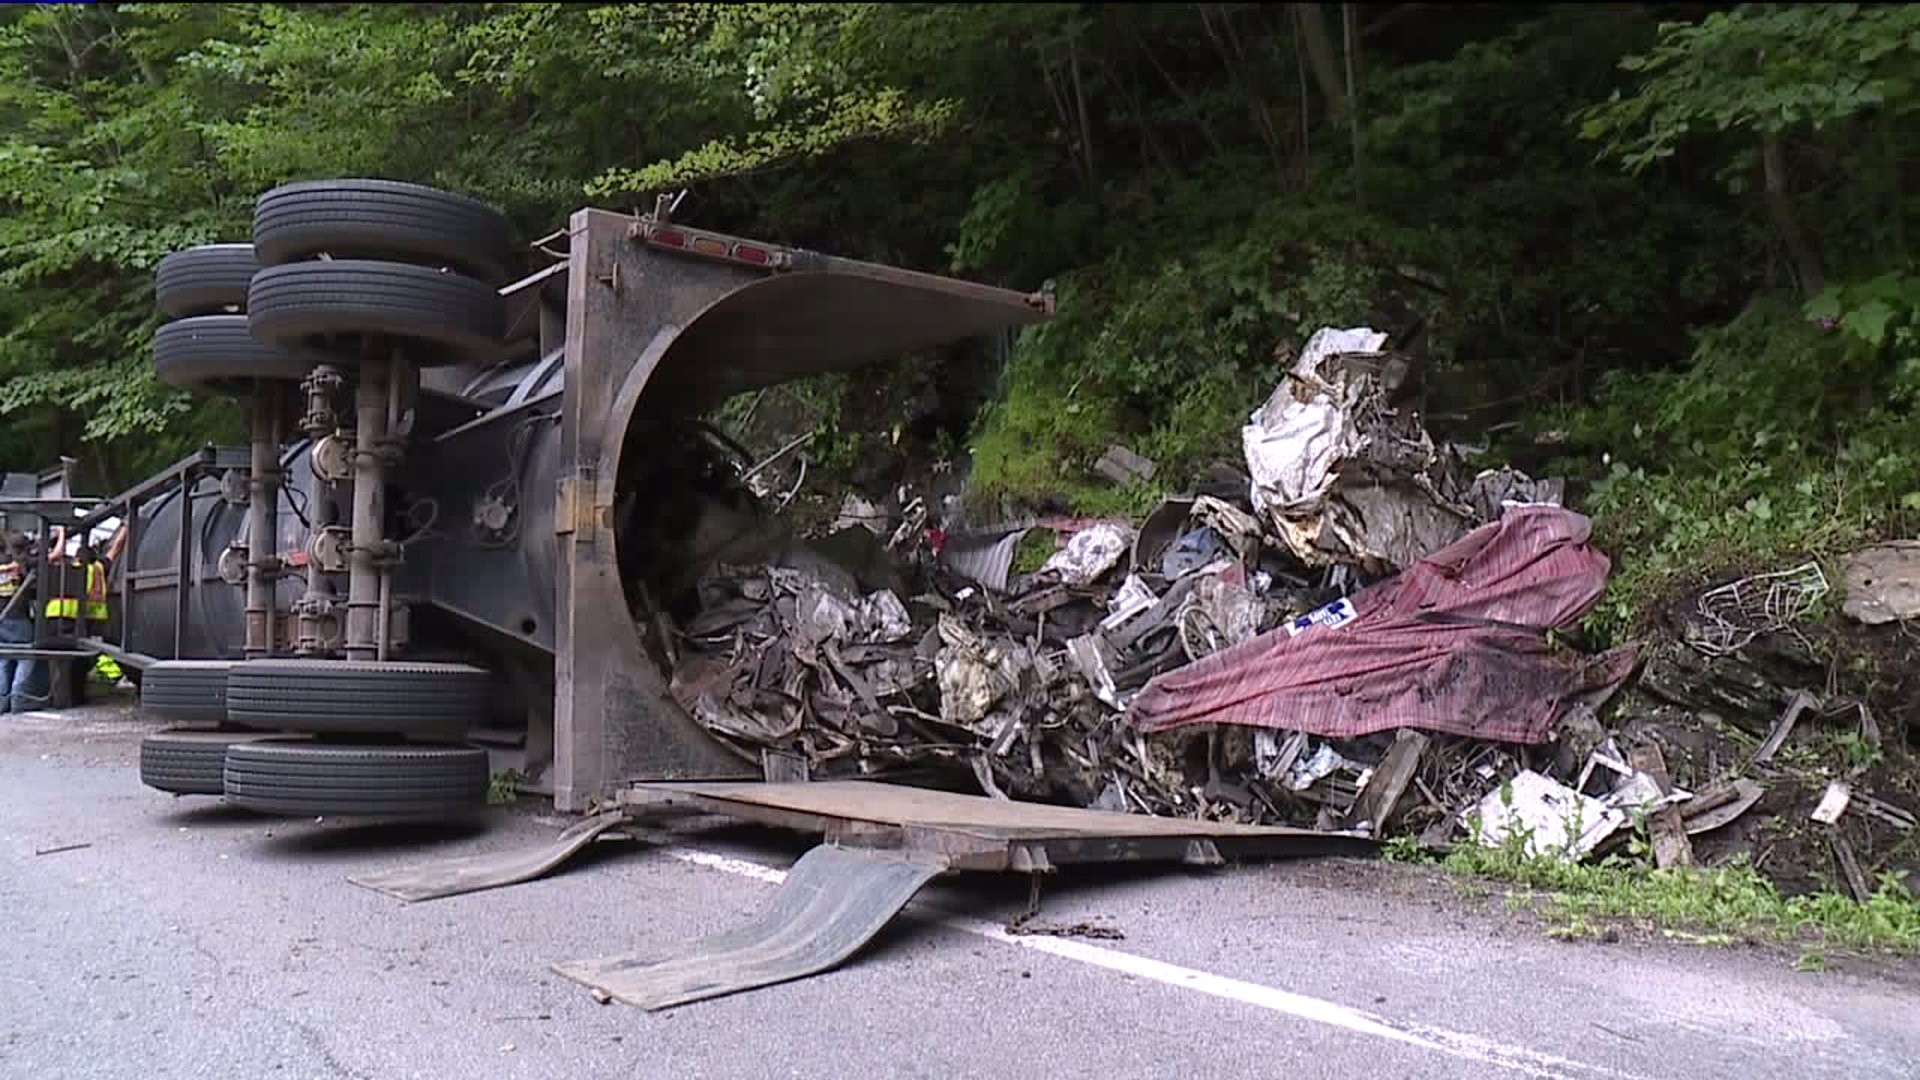 Route 29 Closed After Truck Spills Trash onto Road